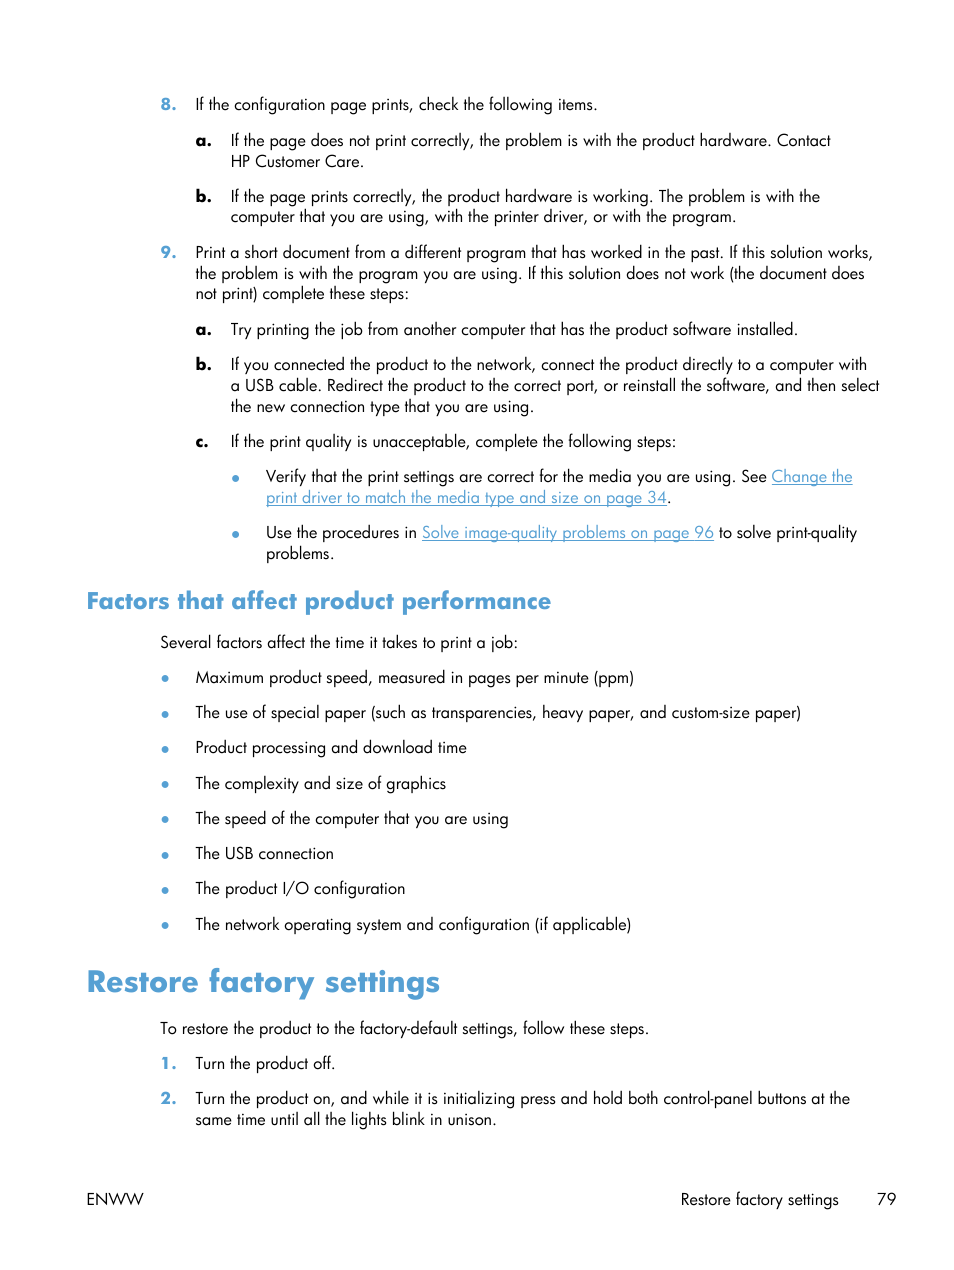 Factors that affect product performance, Restore factory settings | HP Laserjet p1606dn User Manual | Page 91 / 152